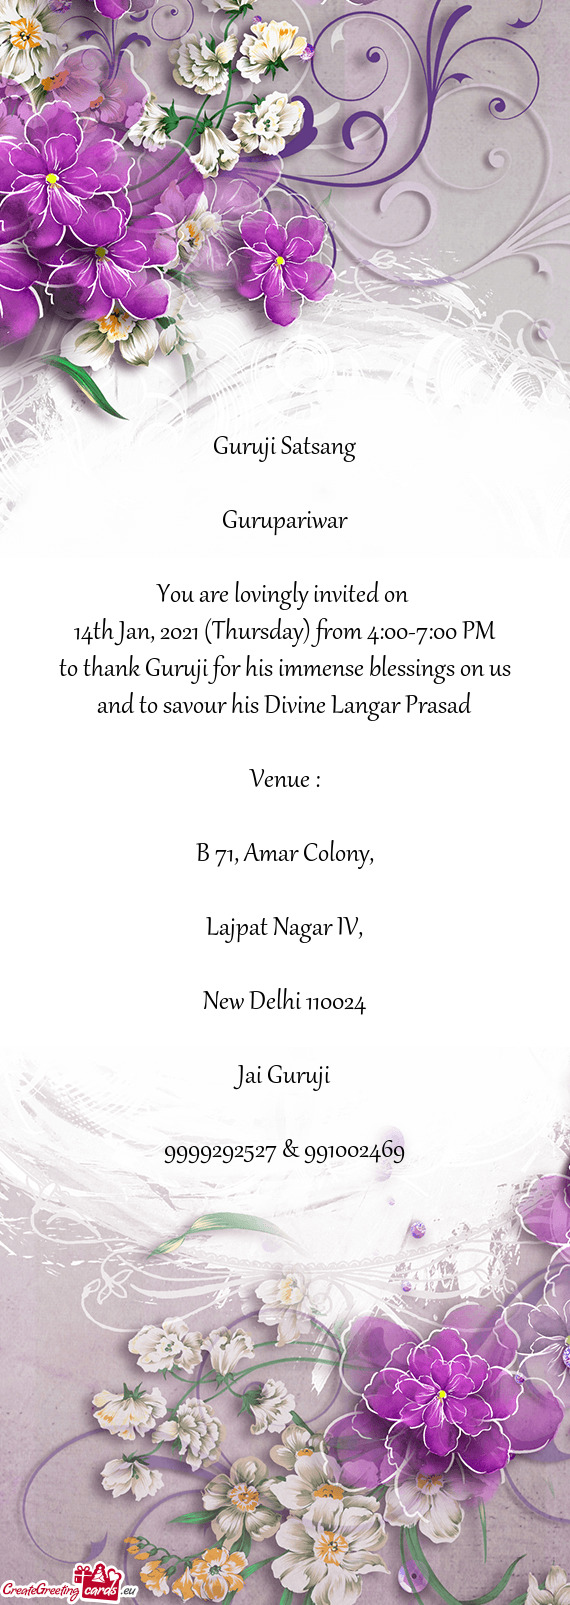 14th Jan, 2021 (Thursday) from 4:00-7:00 PM